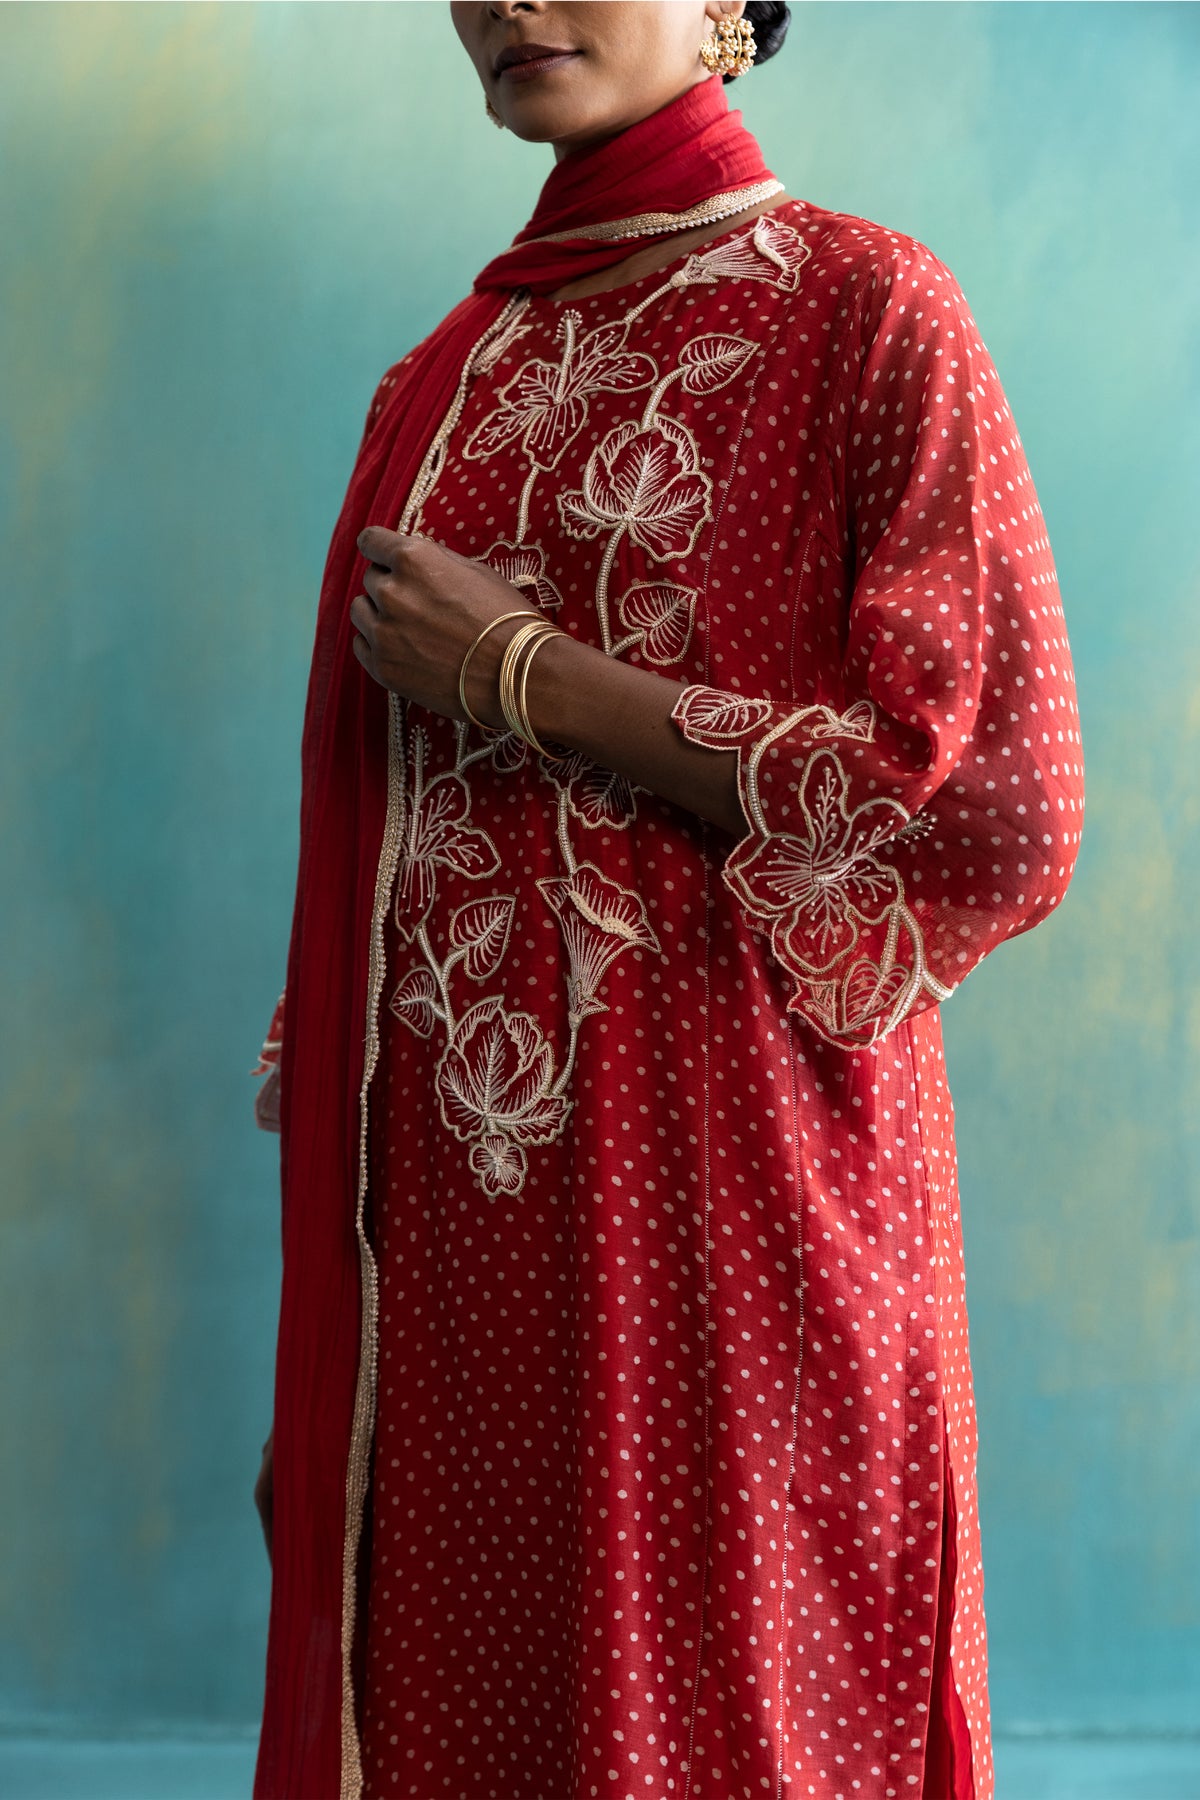 DIL-KASH RED CHANDERI KURTA WITH LONG YOKE FLORAL EMBROIDERY ON POLKA